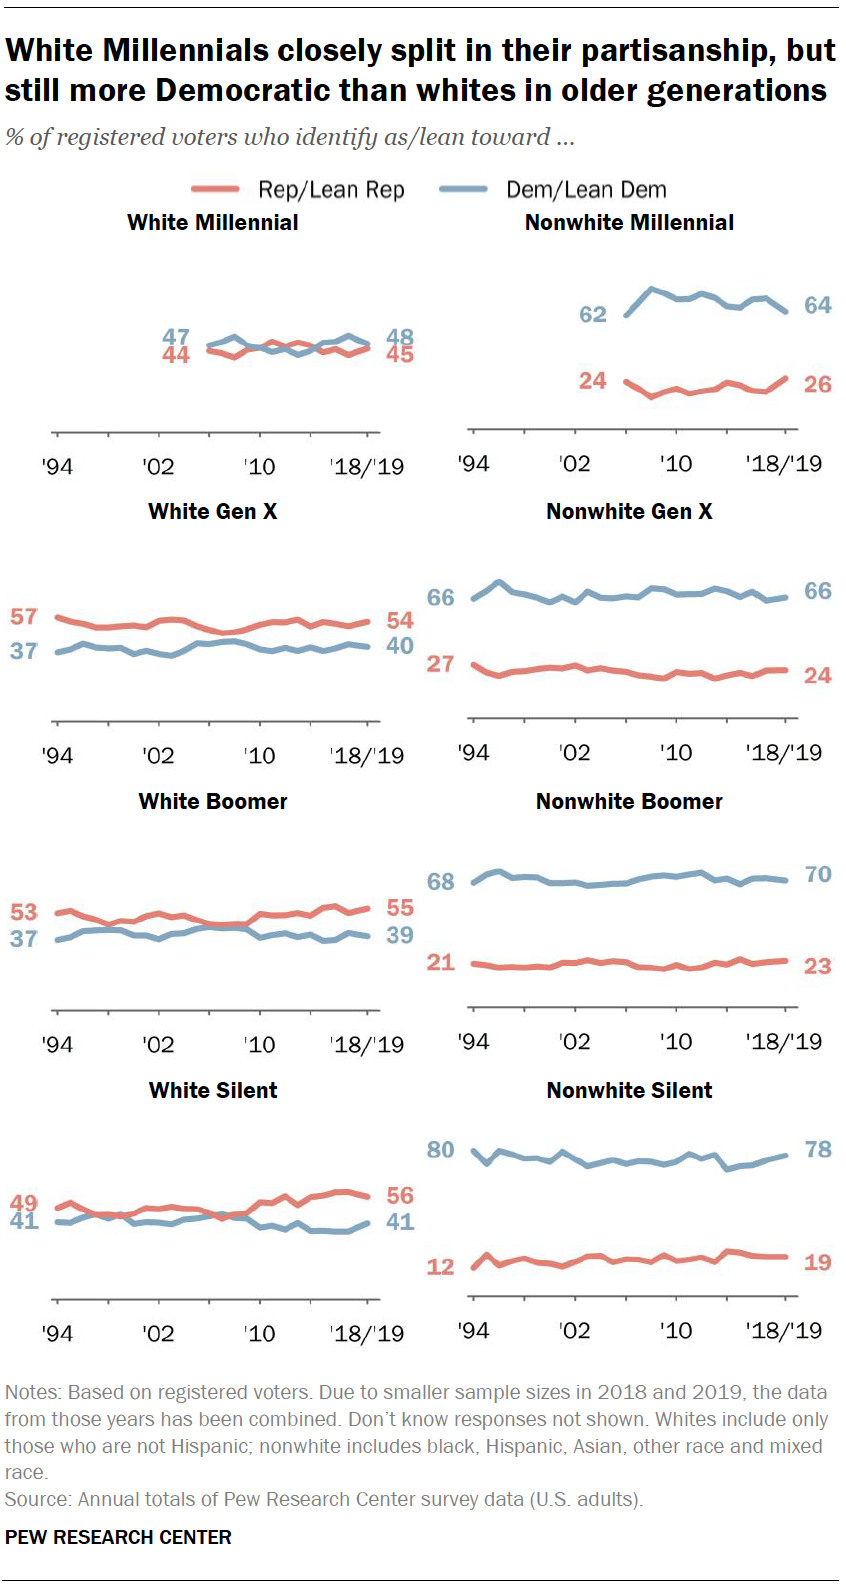 White Millennials closely split in their partisanship, but still more Democratic than whites in older generations